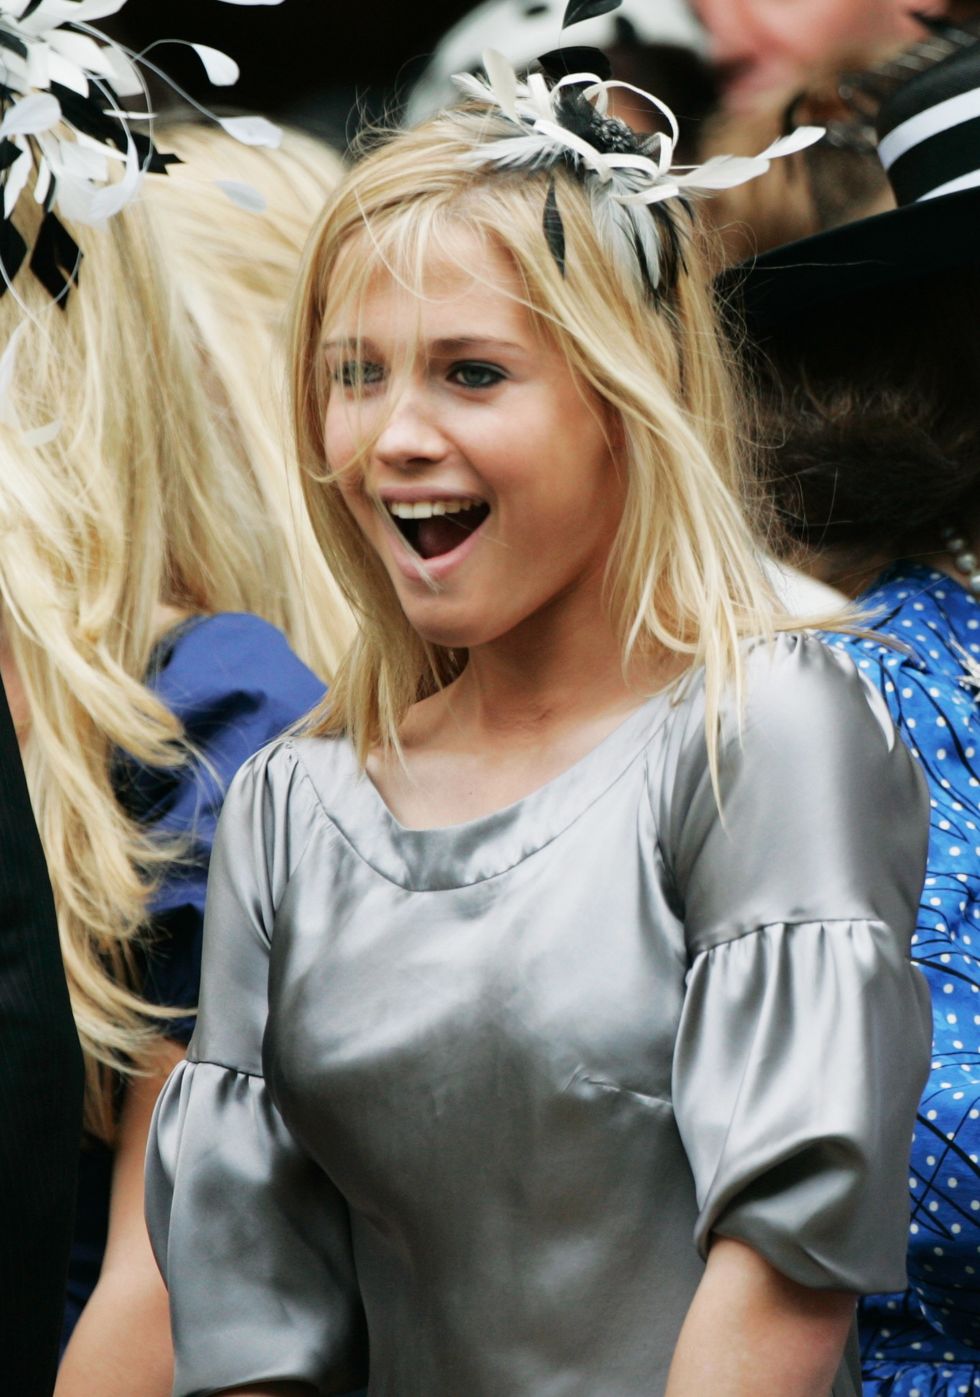 london, england   august 31 amelia spencer at the 10th anniversary memorial service for diana, princess of wales at guards chapel at wellington barracks on august 31, 2007 in london, england photo by tim graham photo library via getty images